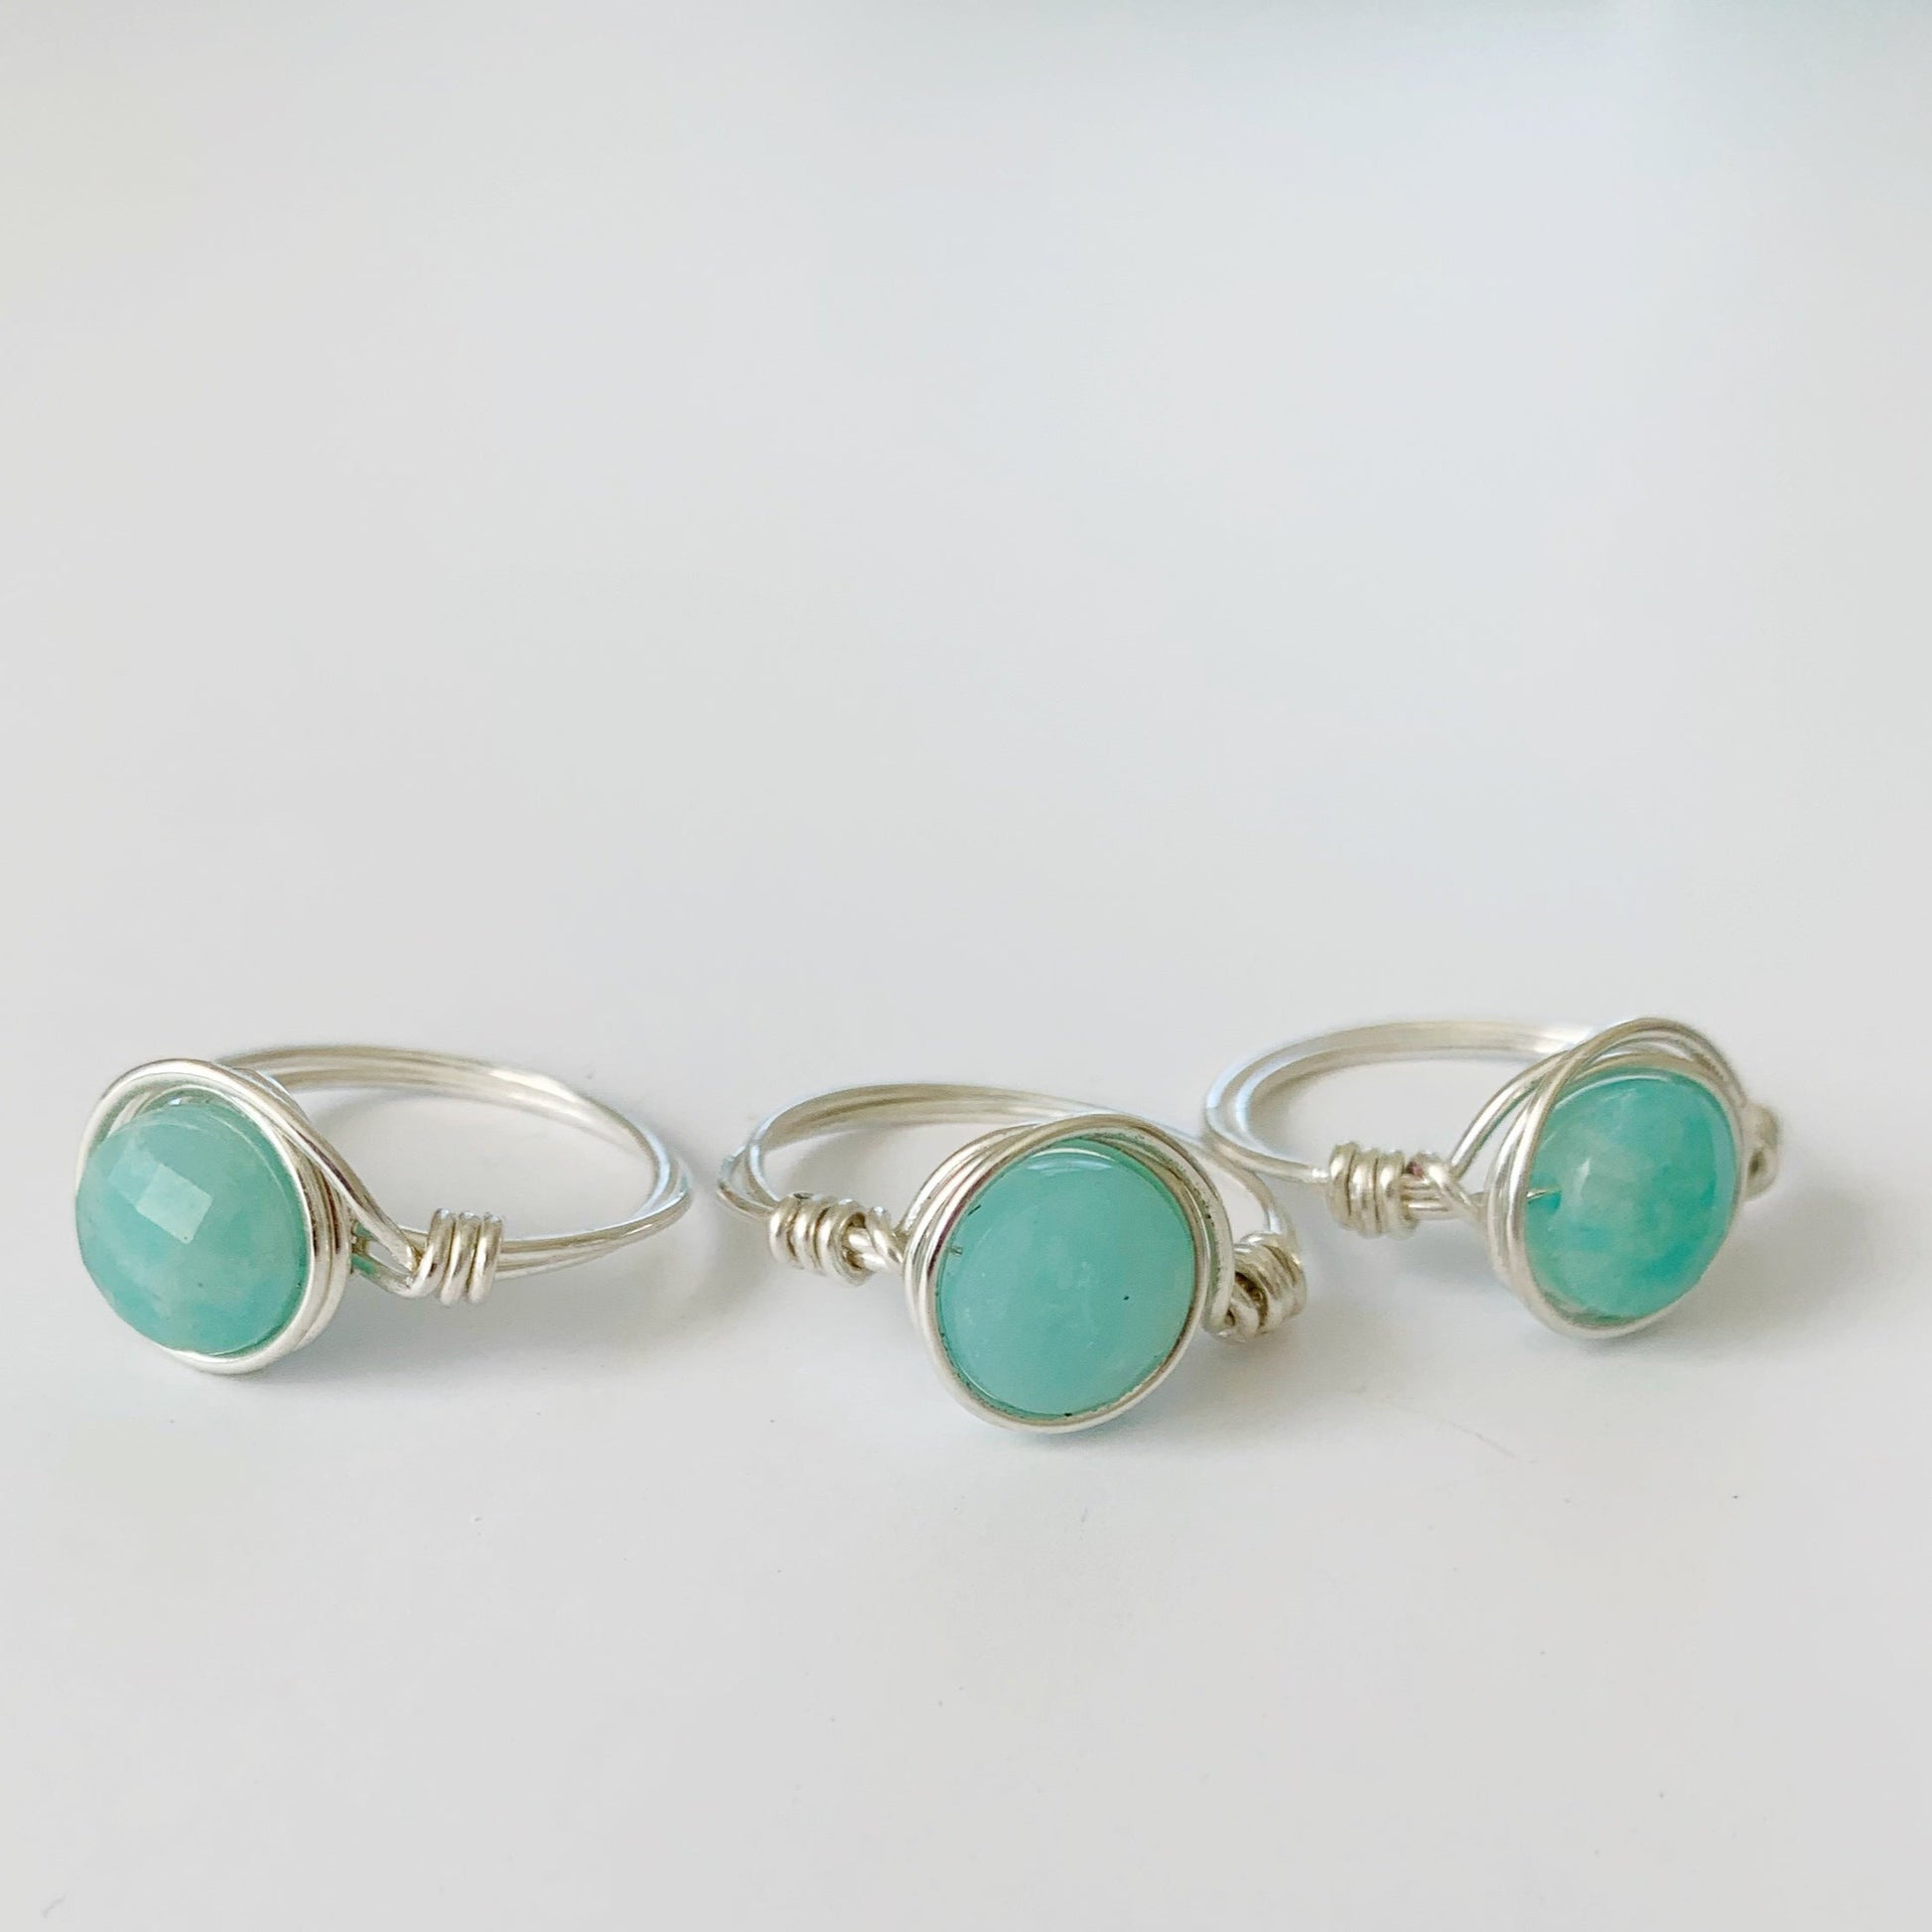 Captiva Rings by Mermaids and Madeleines are wire wrapped rings in sterling silver with amazonite gems at the center. There are 3 rings photographed here on a white surface